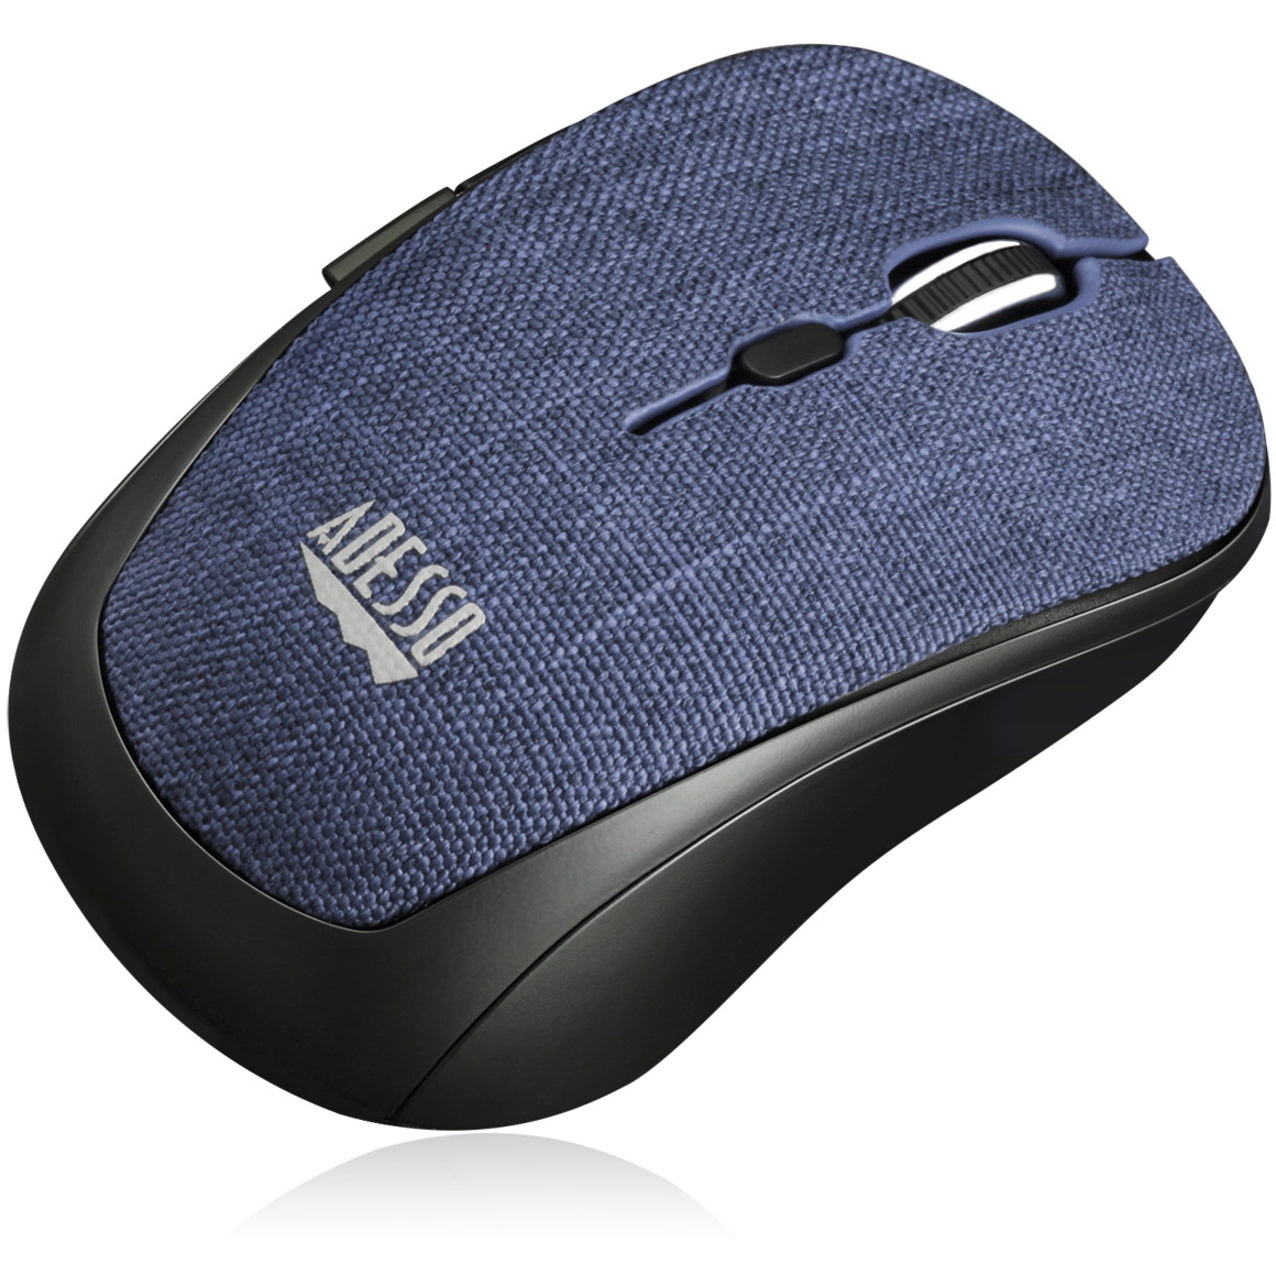 Adesso IMOUSE S80L Wireless Fabric Optical Mini Mouse Blue, Ergonomic Fit, 1600 DPI, 2.4 GHz Wireless Technology